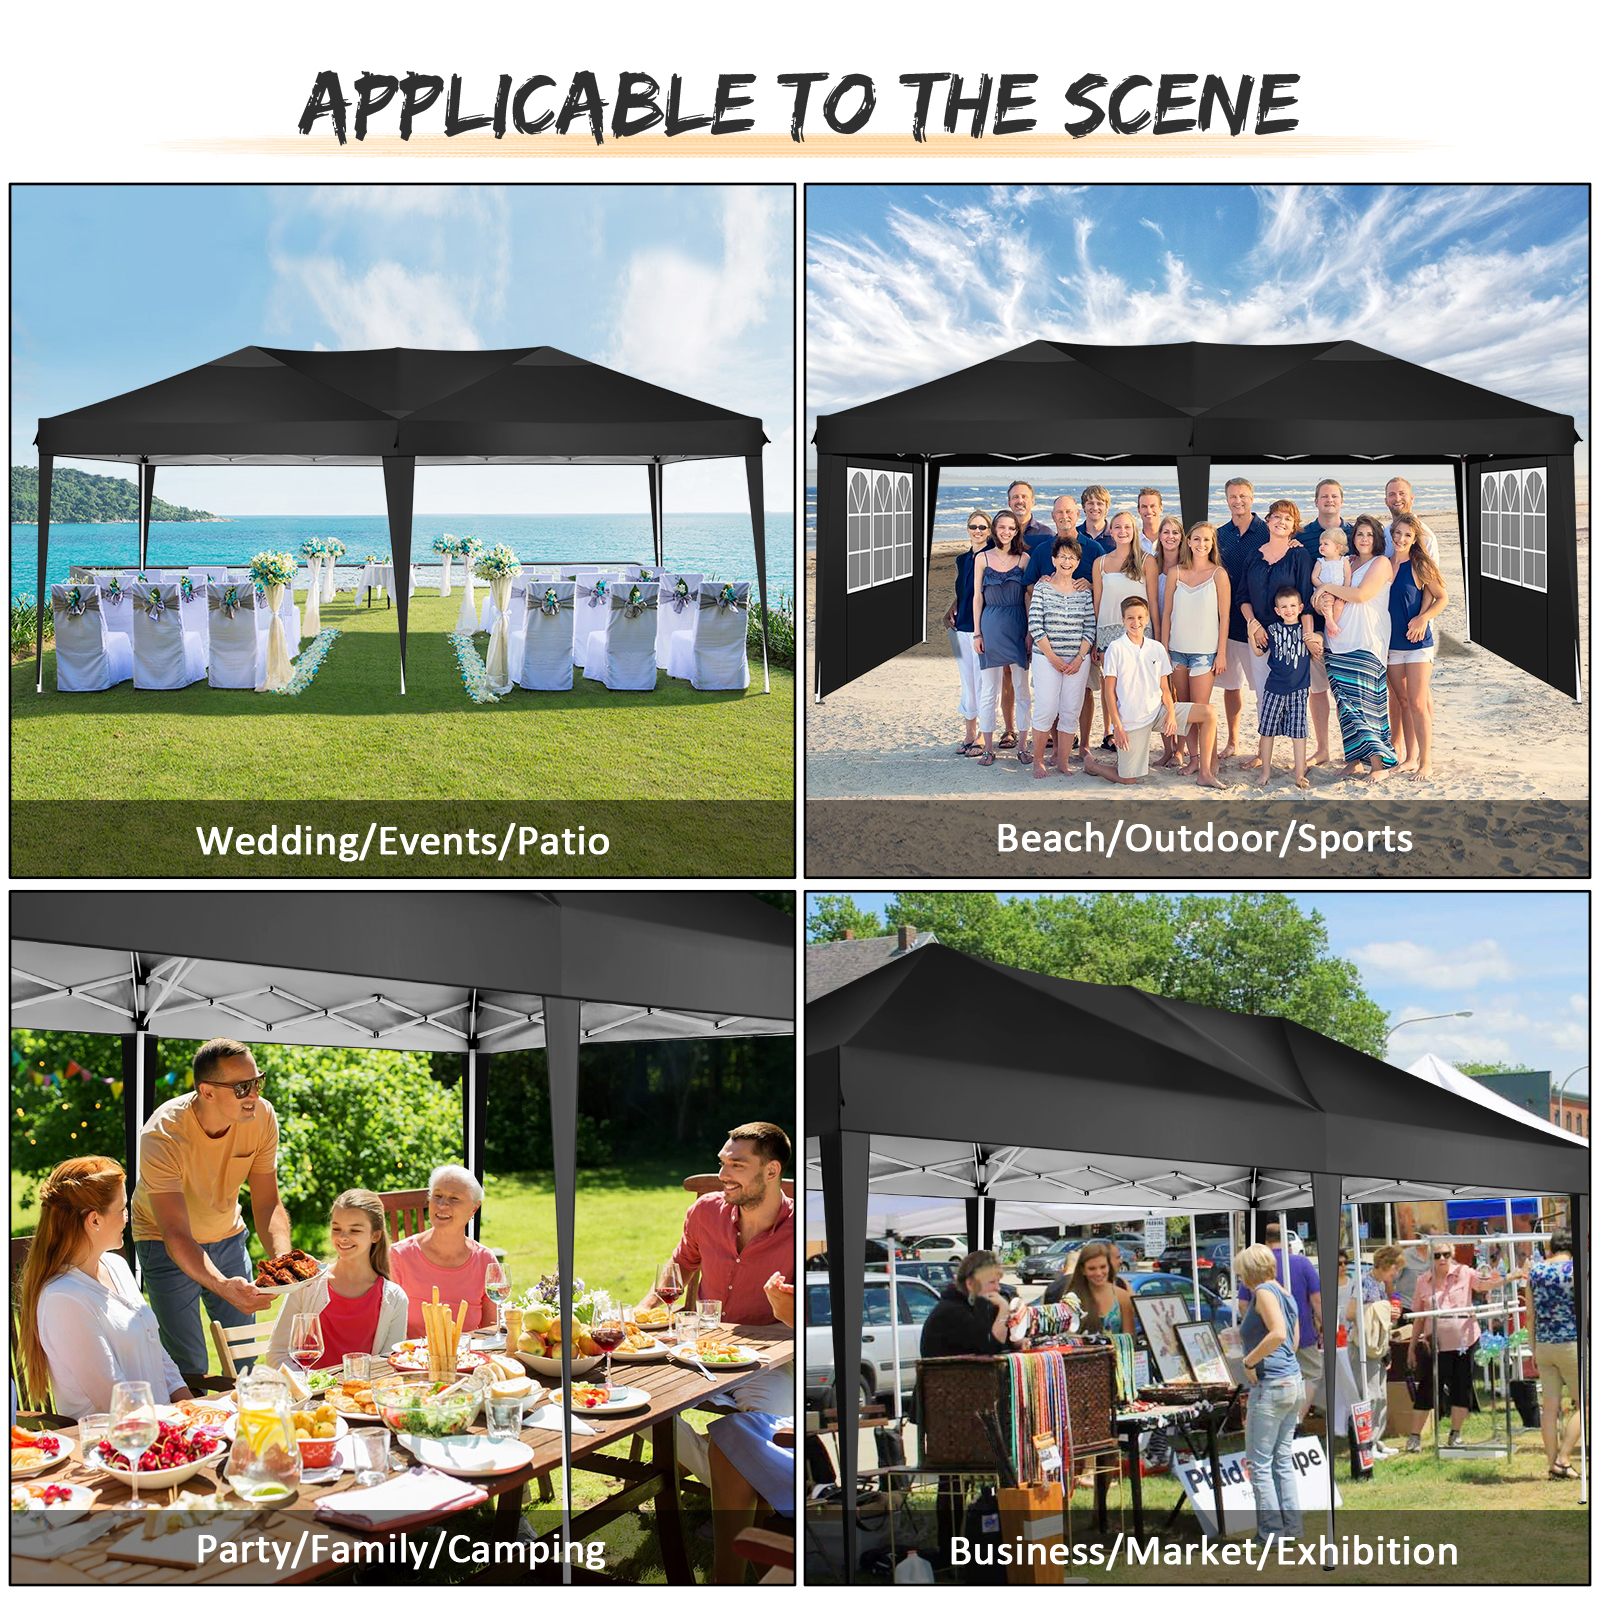 Camping　20-feet　Pop　Party　Up　Outdoor　Commercial　Canopy　Shel-　Tent　Family　Portable　Instant　Tent　Beach　Tent　Water-Resistant　10　x